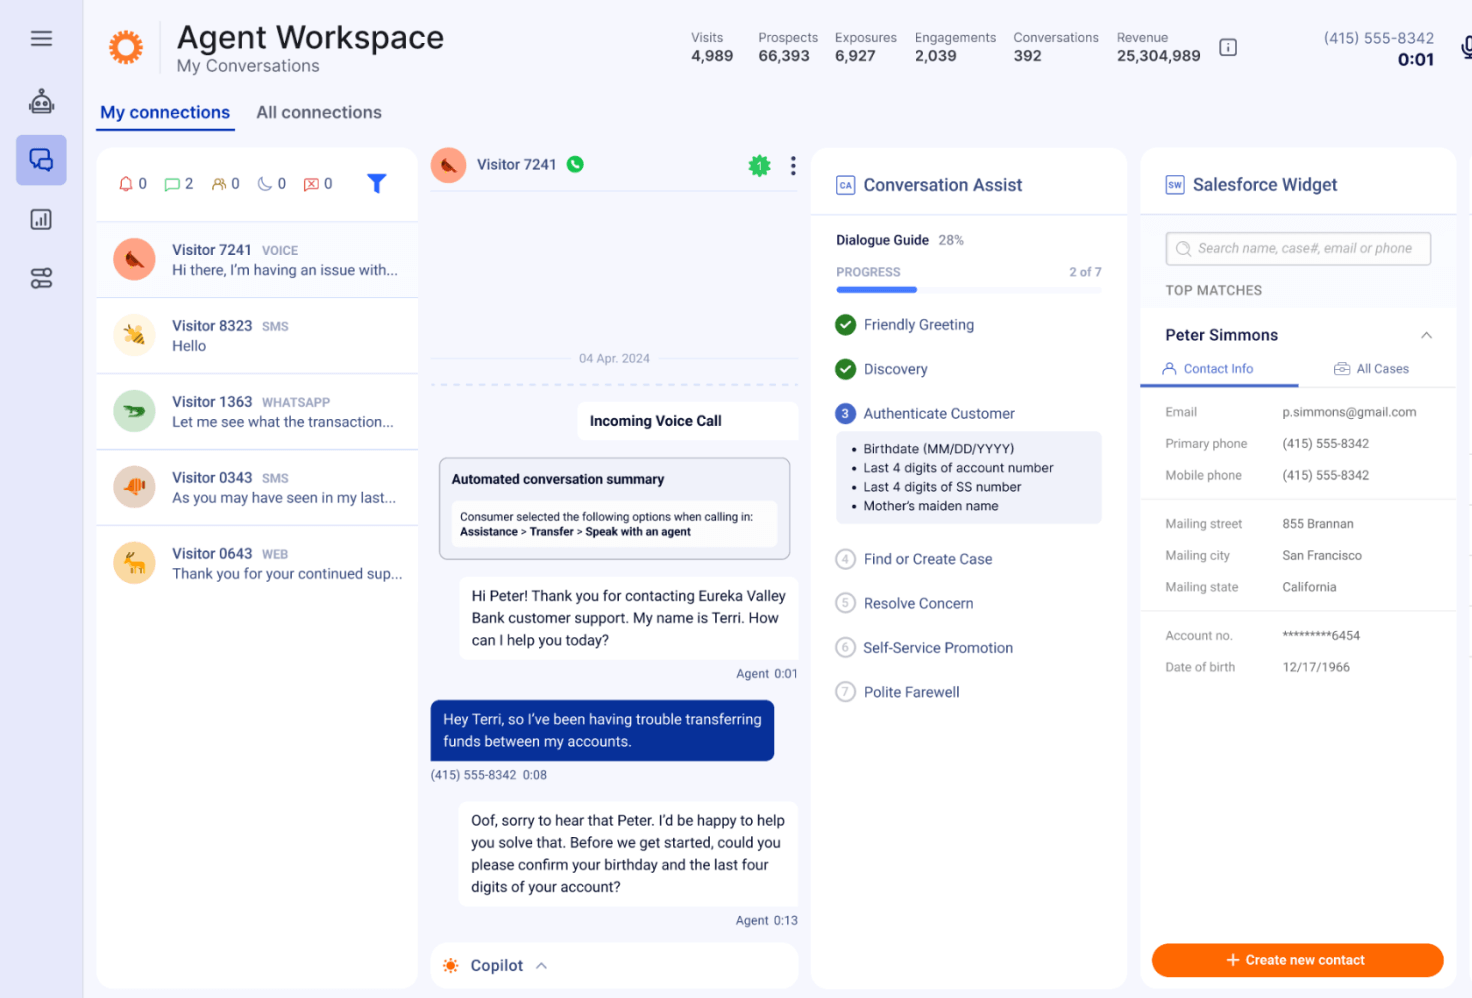 unified agent workspace, showing the omnichannel experiences like handling voice calls alongside messaging